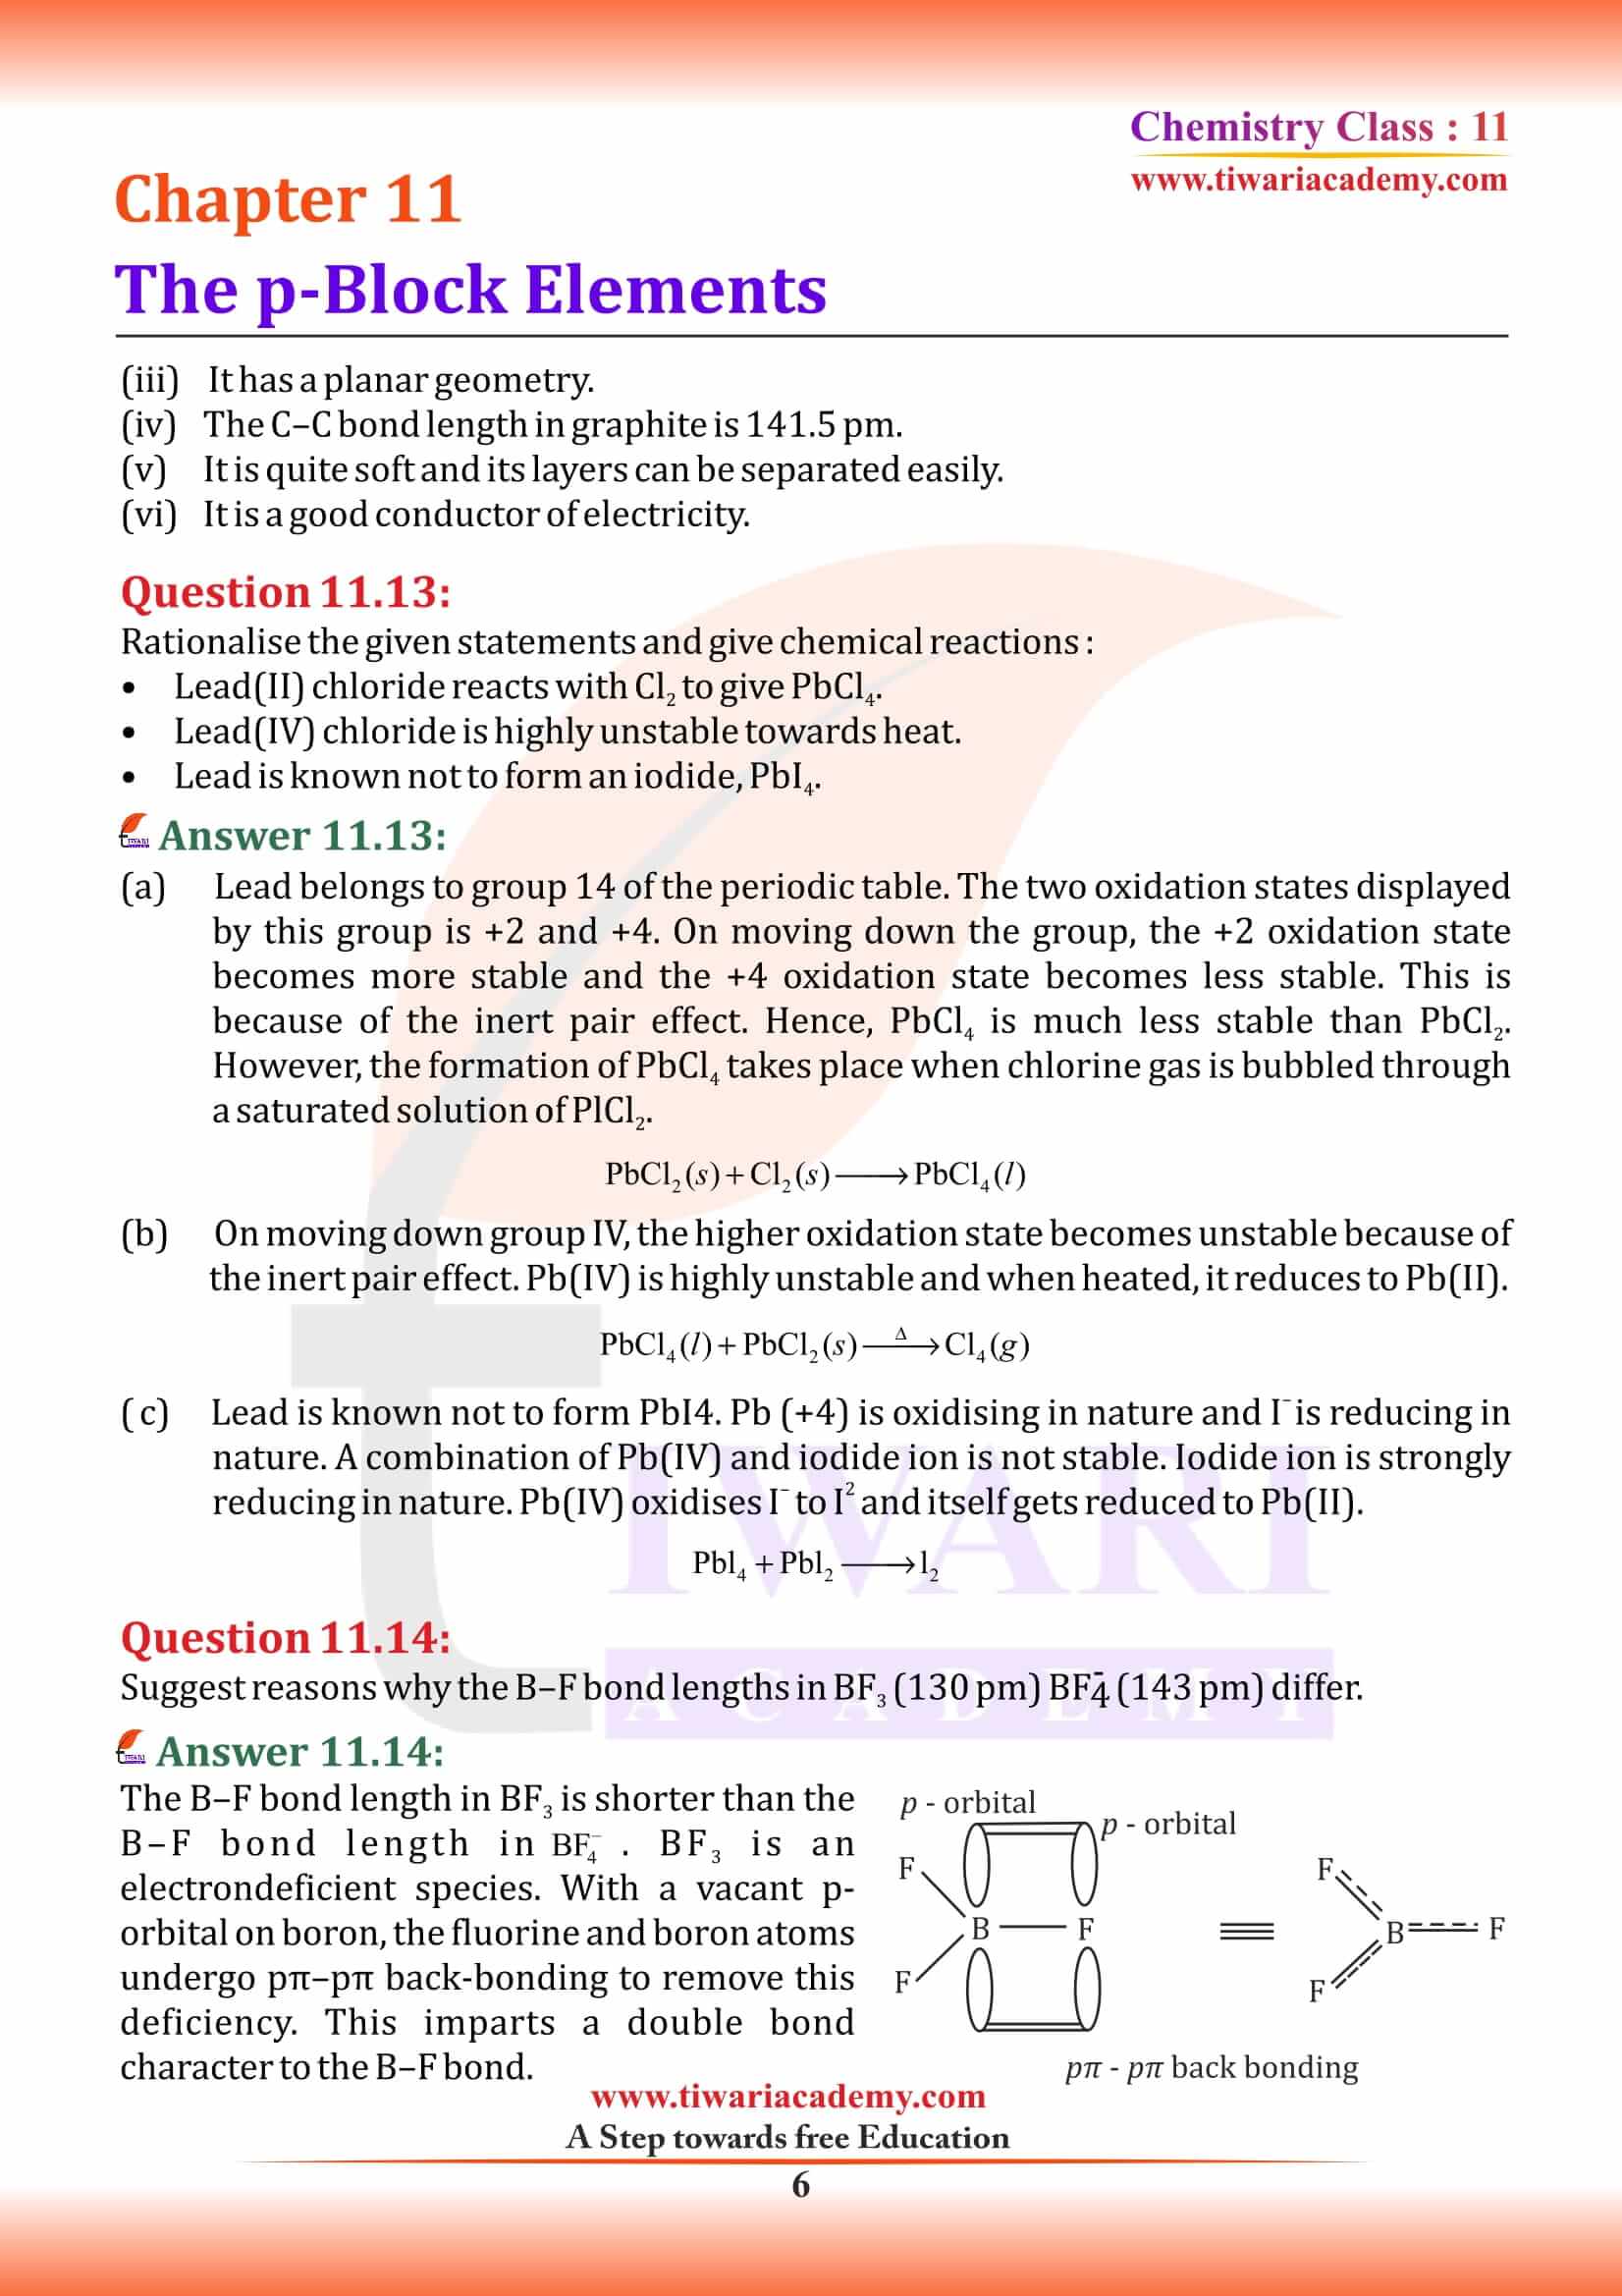 NCERT Solutions for Class 11 Chemistry Chapter 11 exercises answers